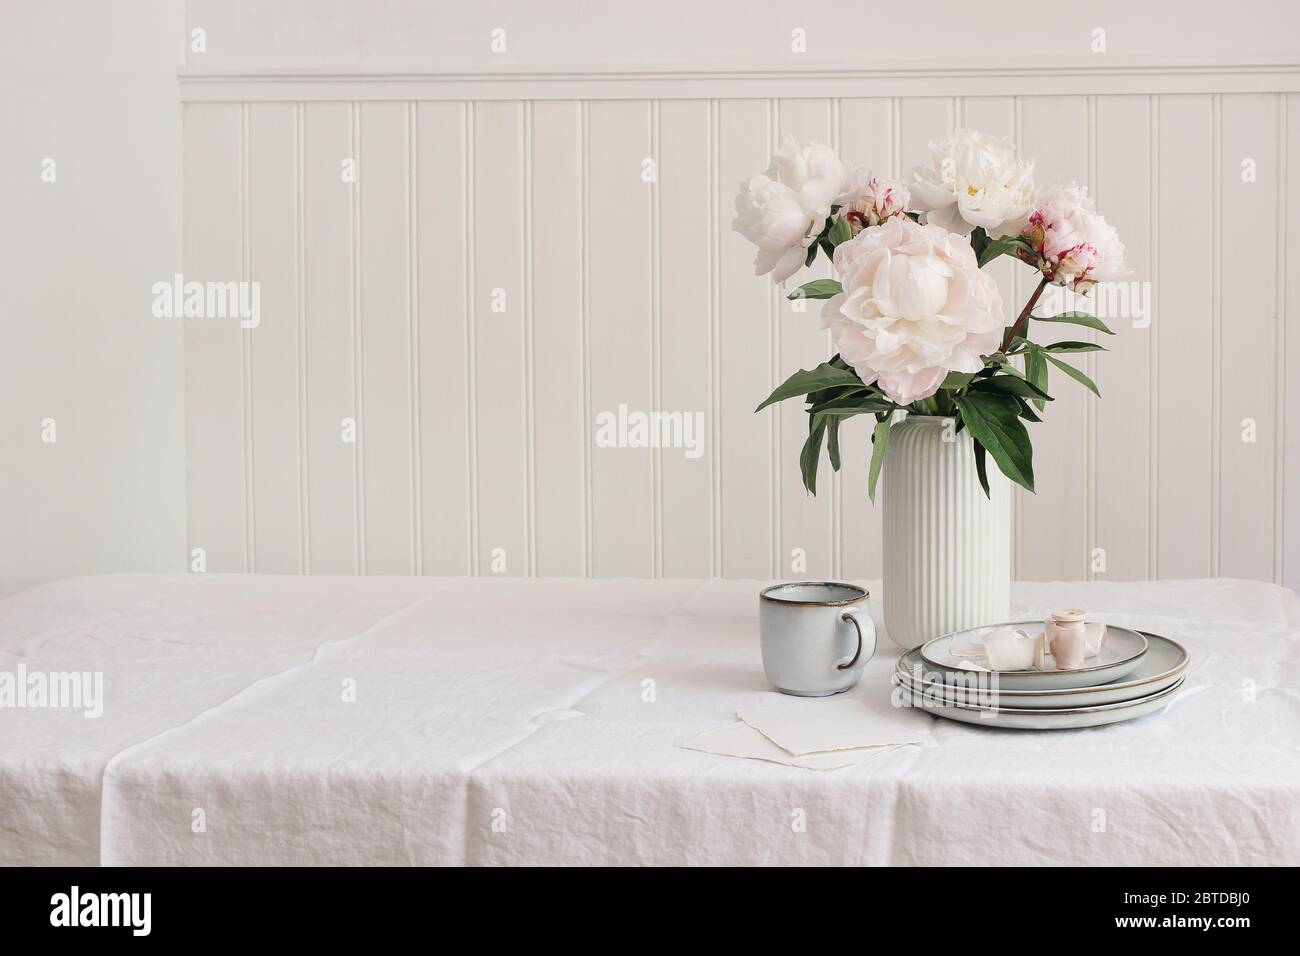 Styled stock photo. Feminine wedding or birthday table composition with floral bouquet. Pink peonies flowers, cup of coffee, plates and silk ribbons, Stock Photo